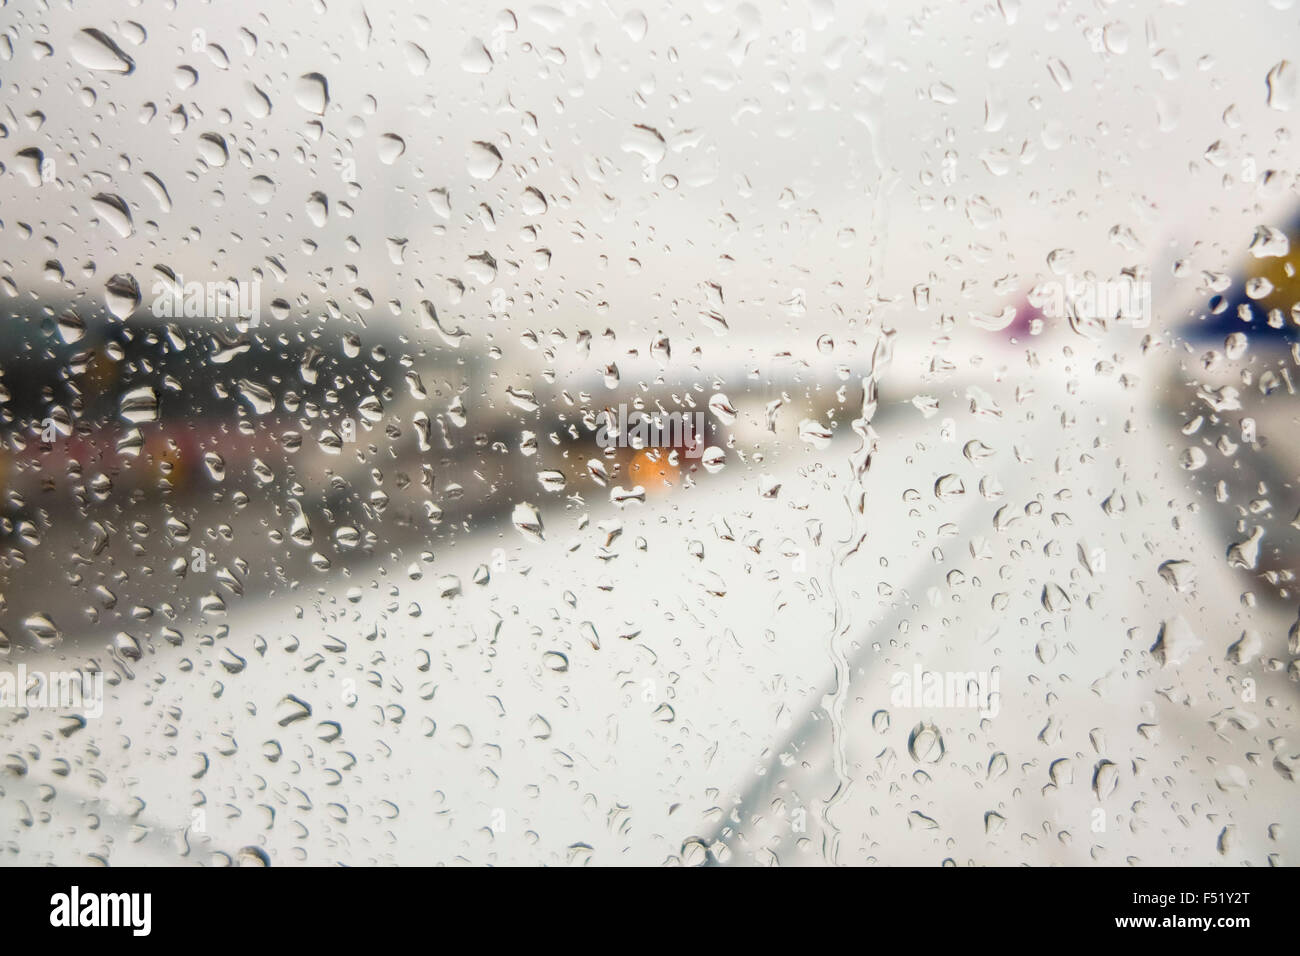 Rain drops on airplane window, Ryanair aircrafts, Eindhoven airport, Netherlands. Stock Photo